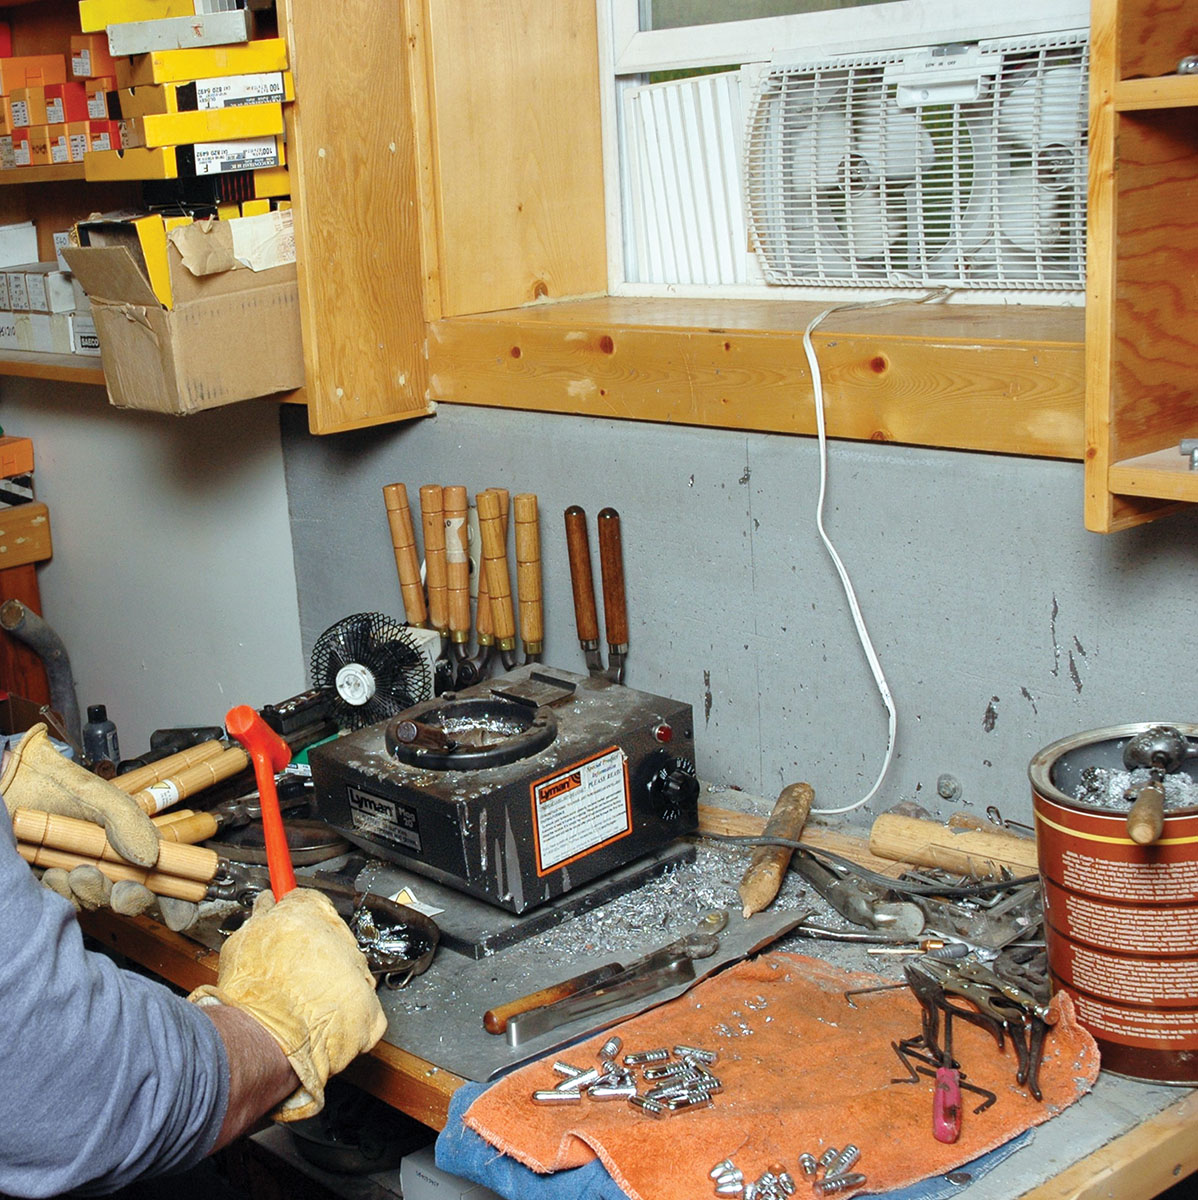 This is Mike’s casting area. Note the orange dead blow hammer, folded towels for cushioning fresh cast bullets with an assortment of small tools, a manicurist fan to the left and an exhaust fan in window.